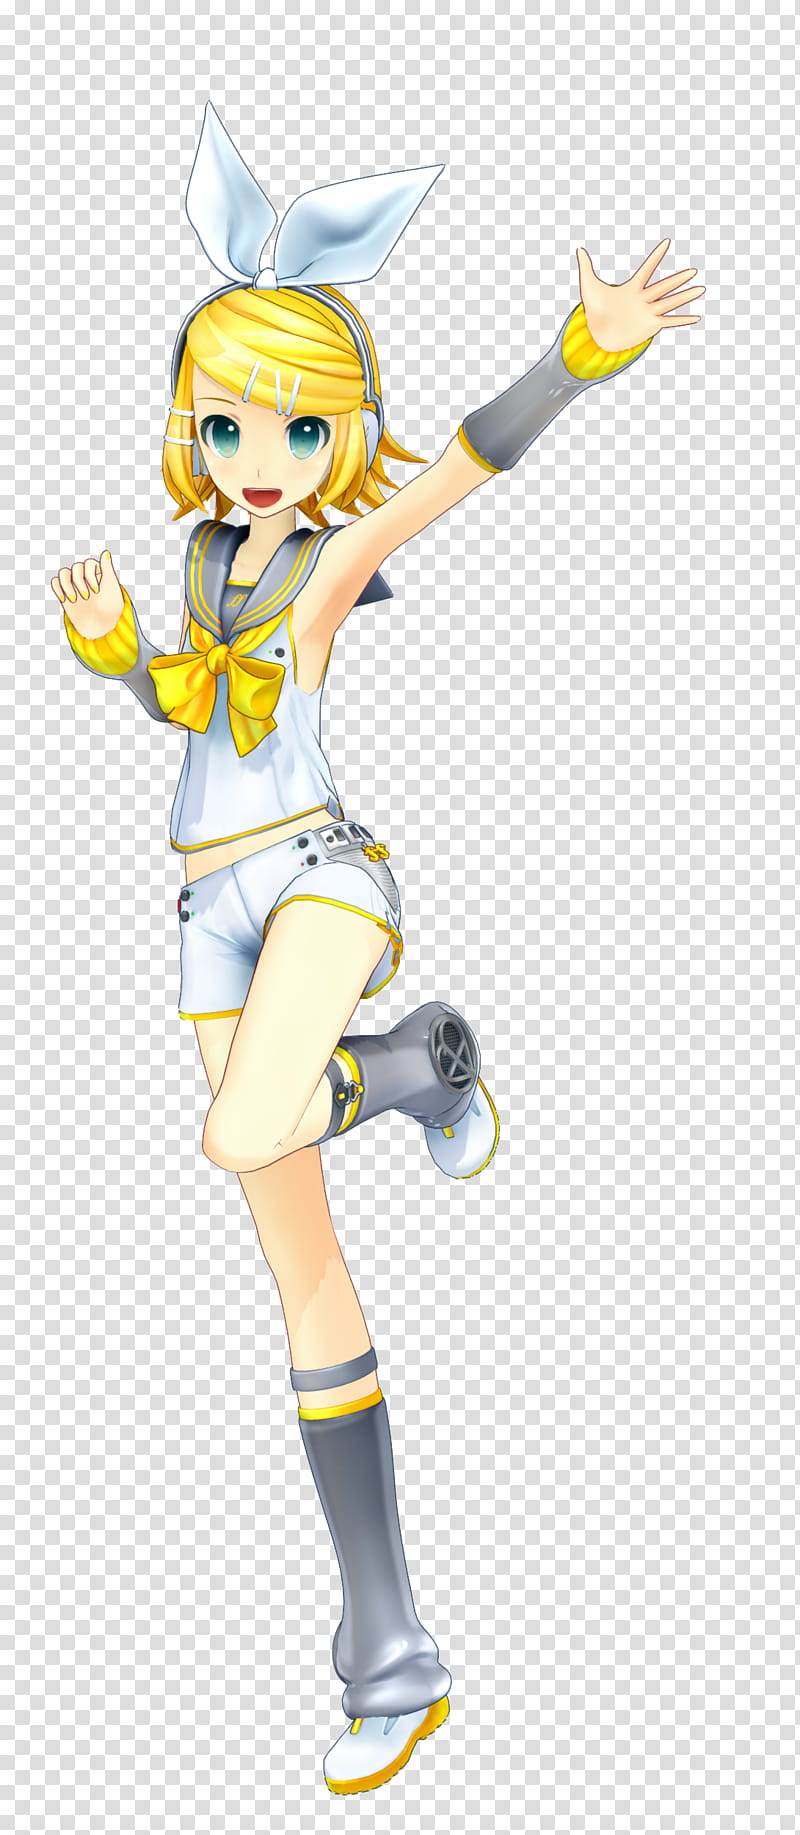 Kagamine Rin VX Model, girl anime character transparent background PNG clipart